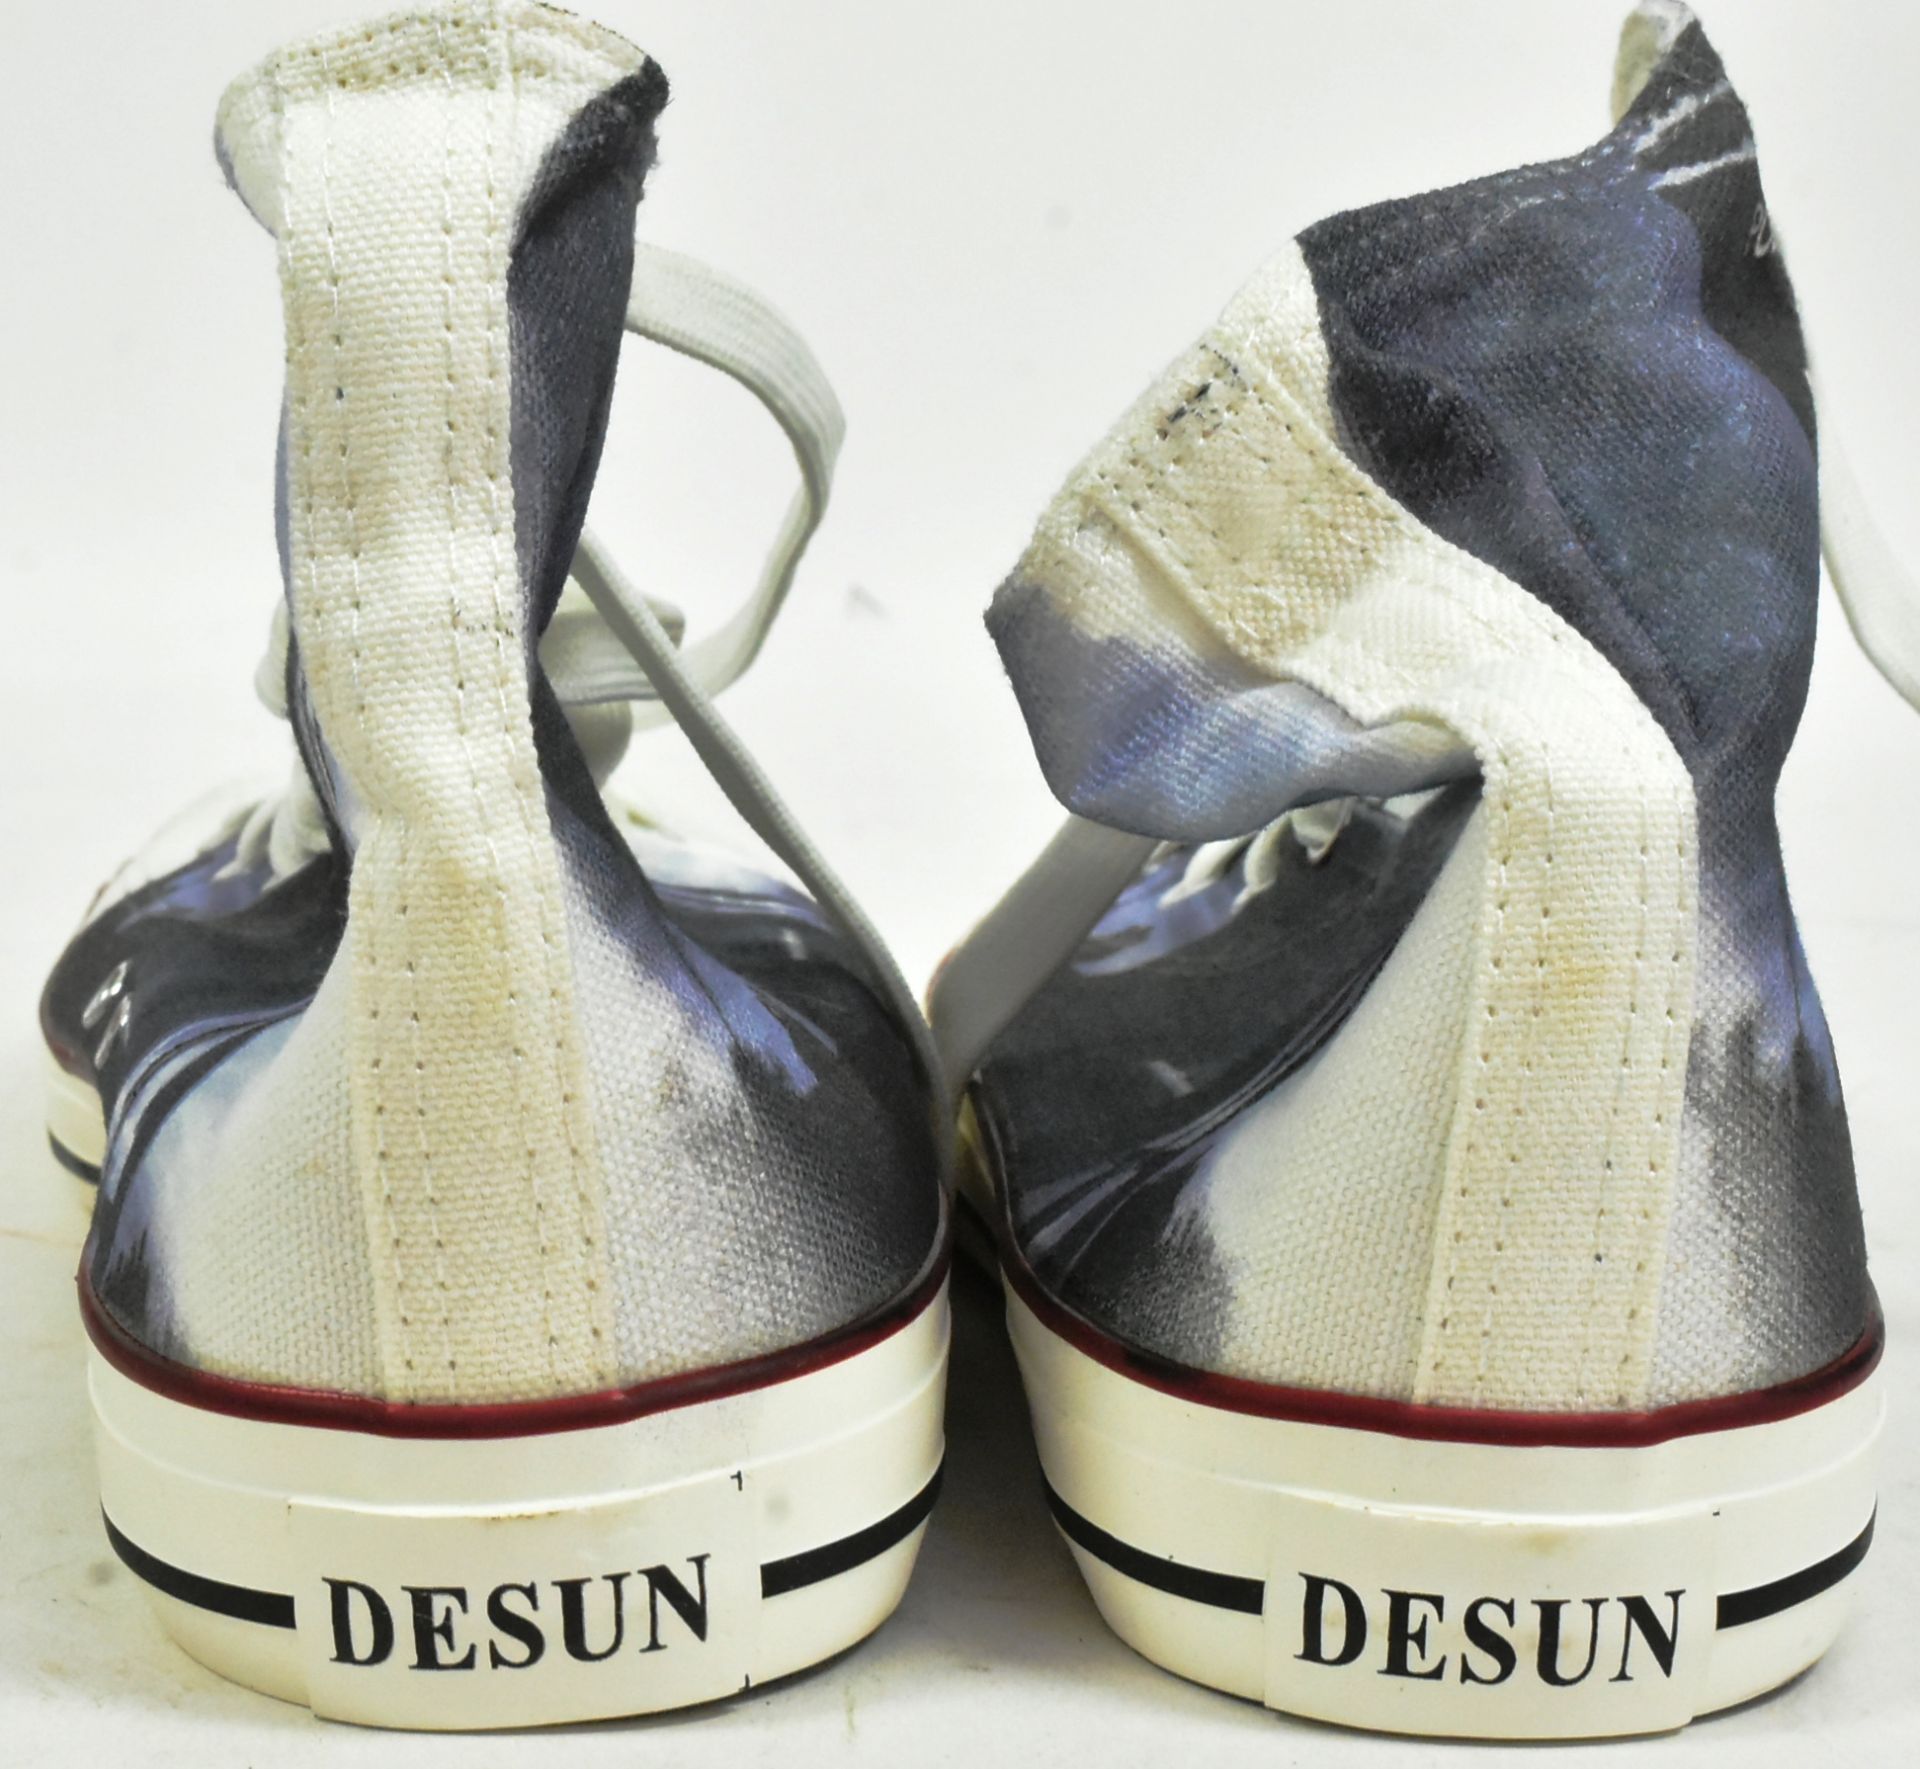 DOCTOR WHO DESUN CONVERSE STYLE HIGH TOP TRAINERS - Image 4 of 6